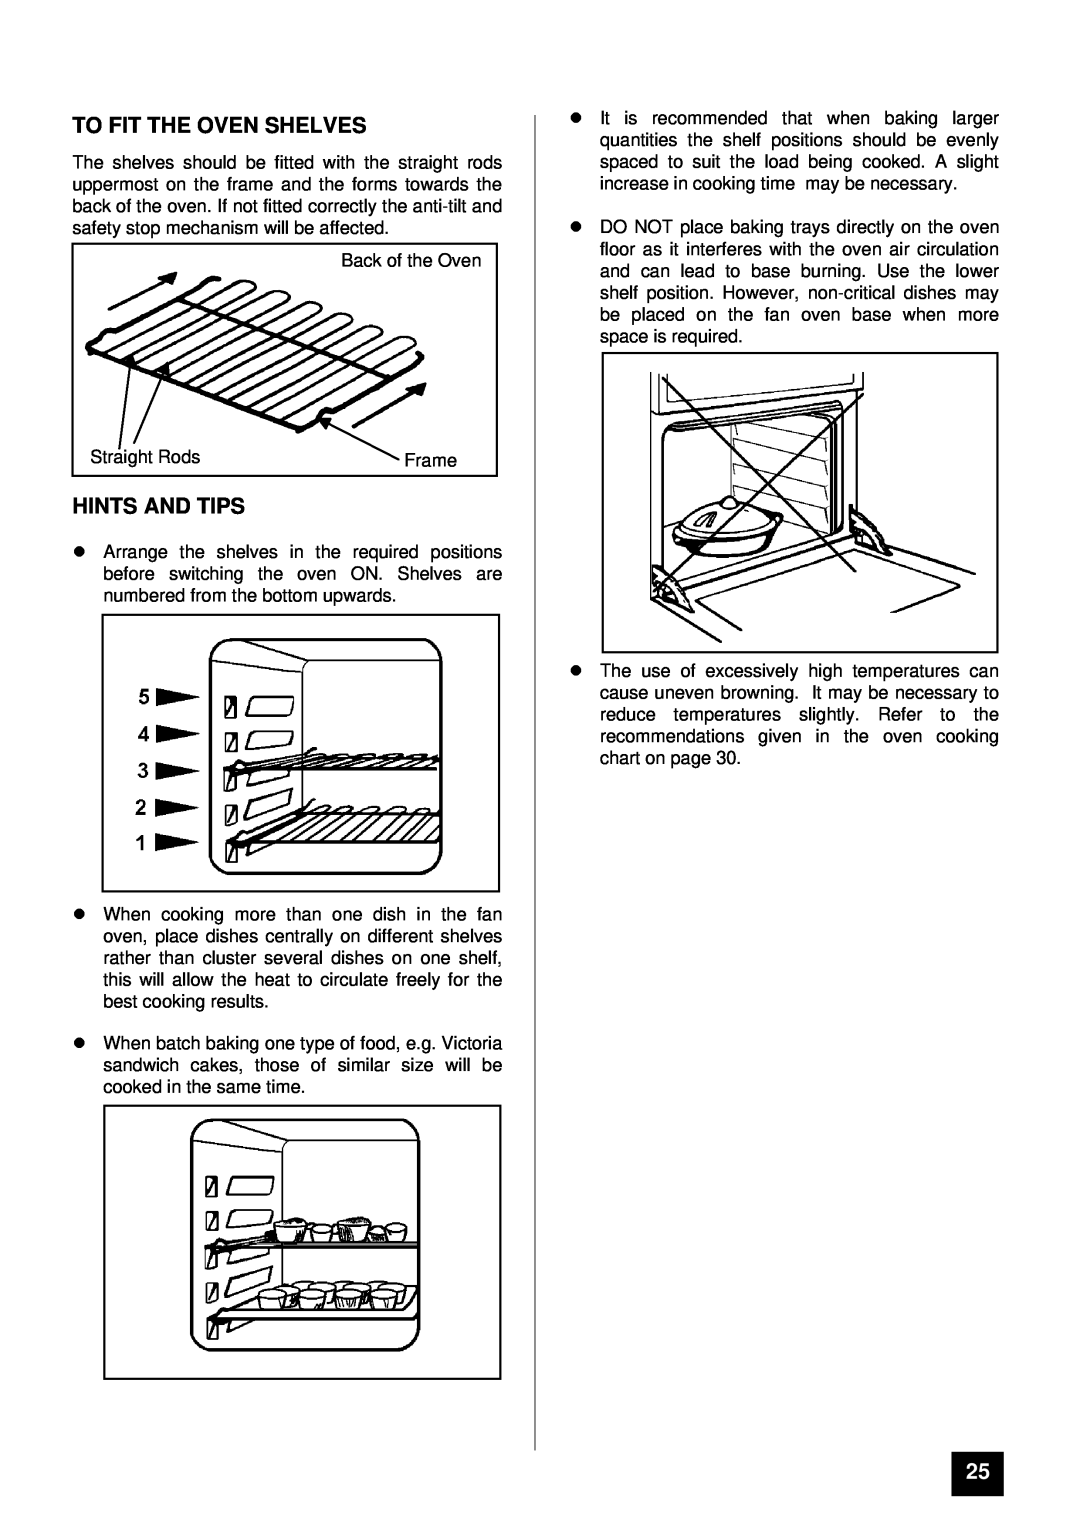 Tricity Bendix SURREY installation instructions To Fit The Oven Shelves, lHINTS AND TIPS 